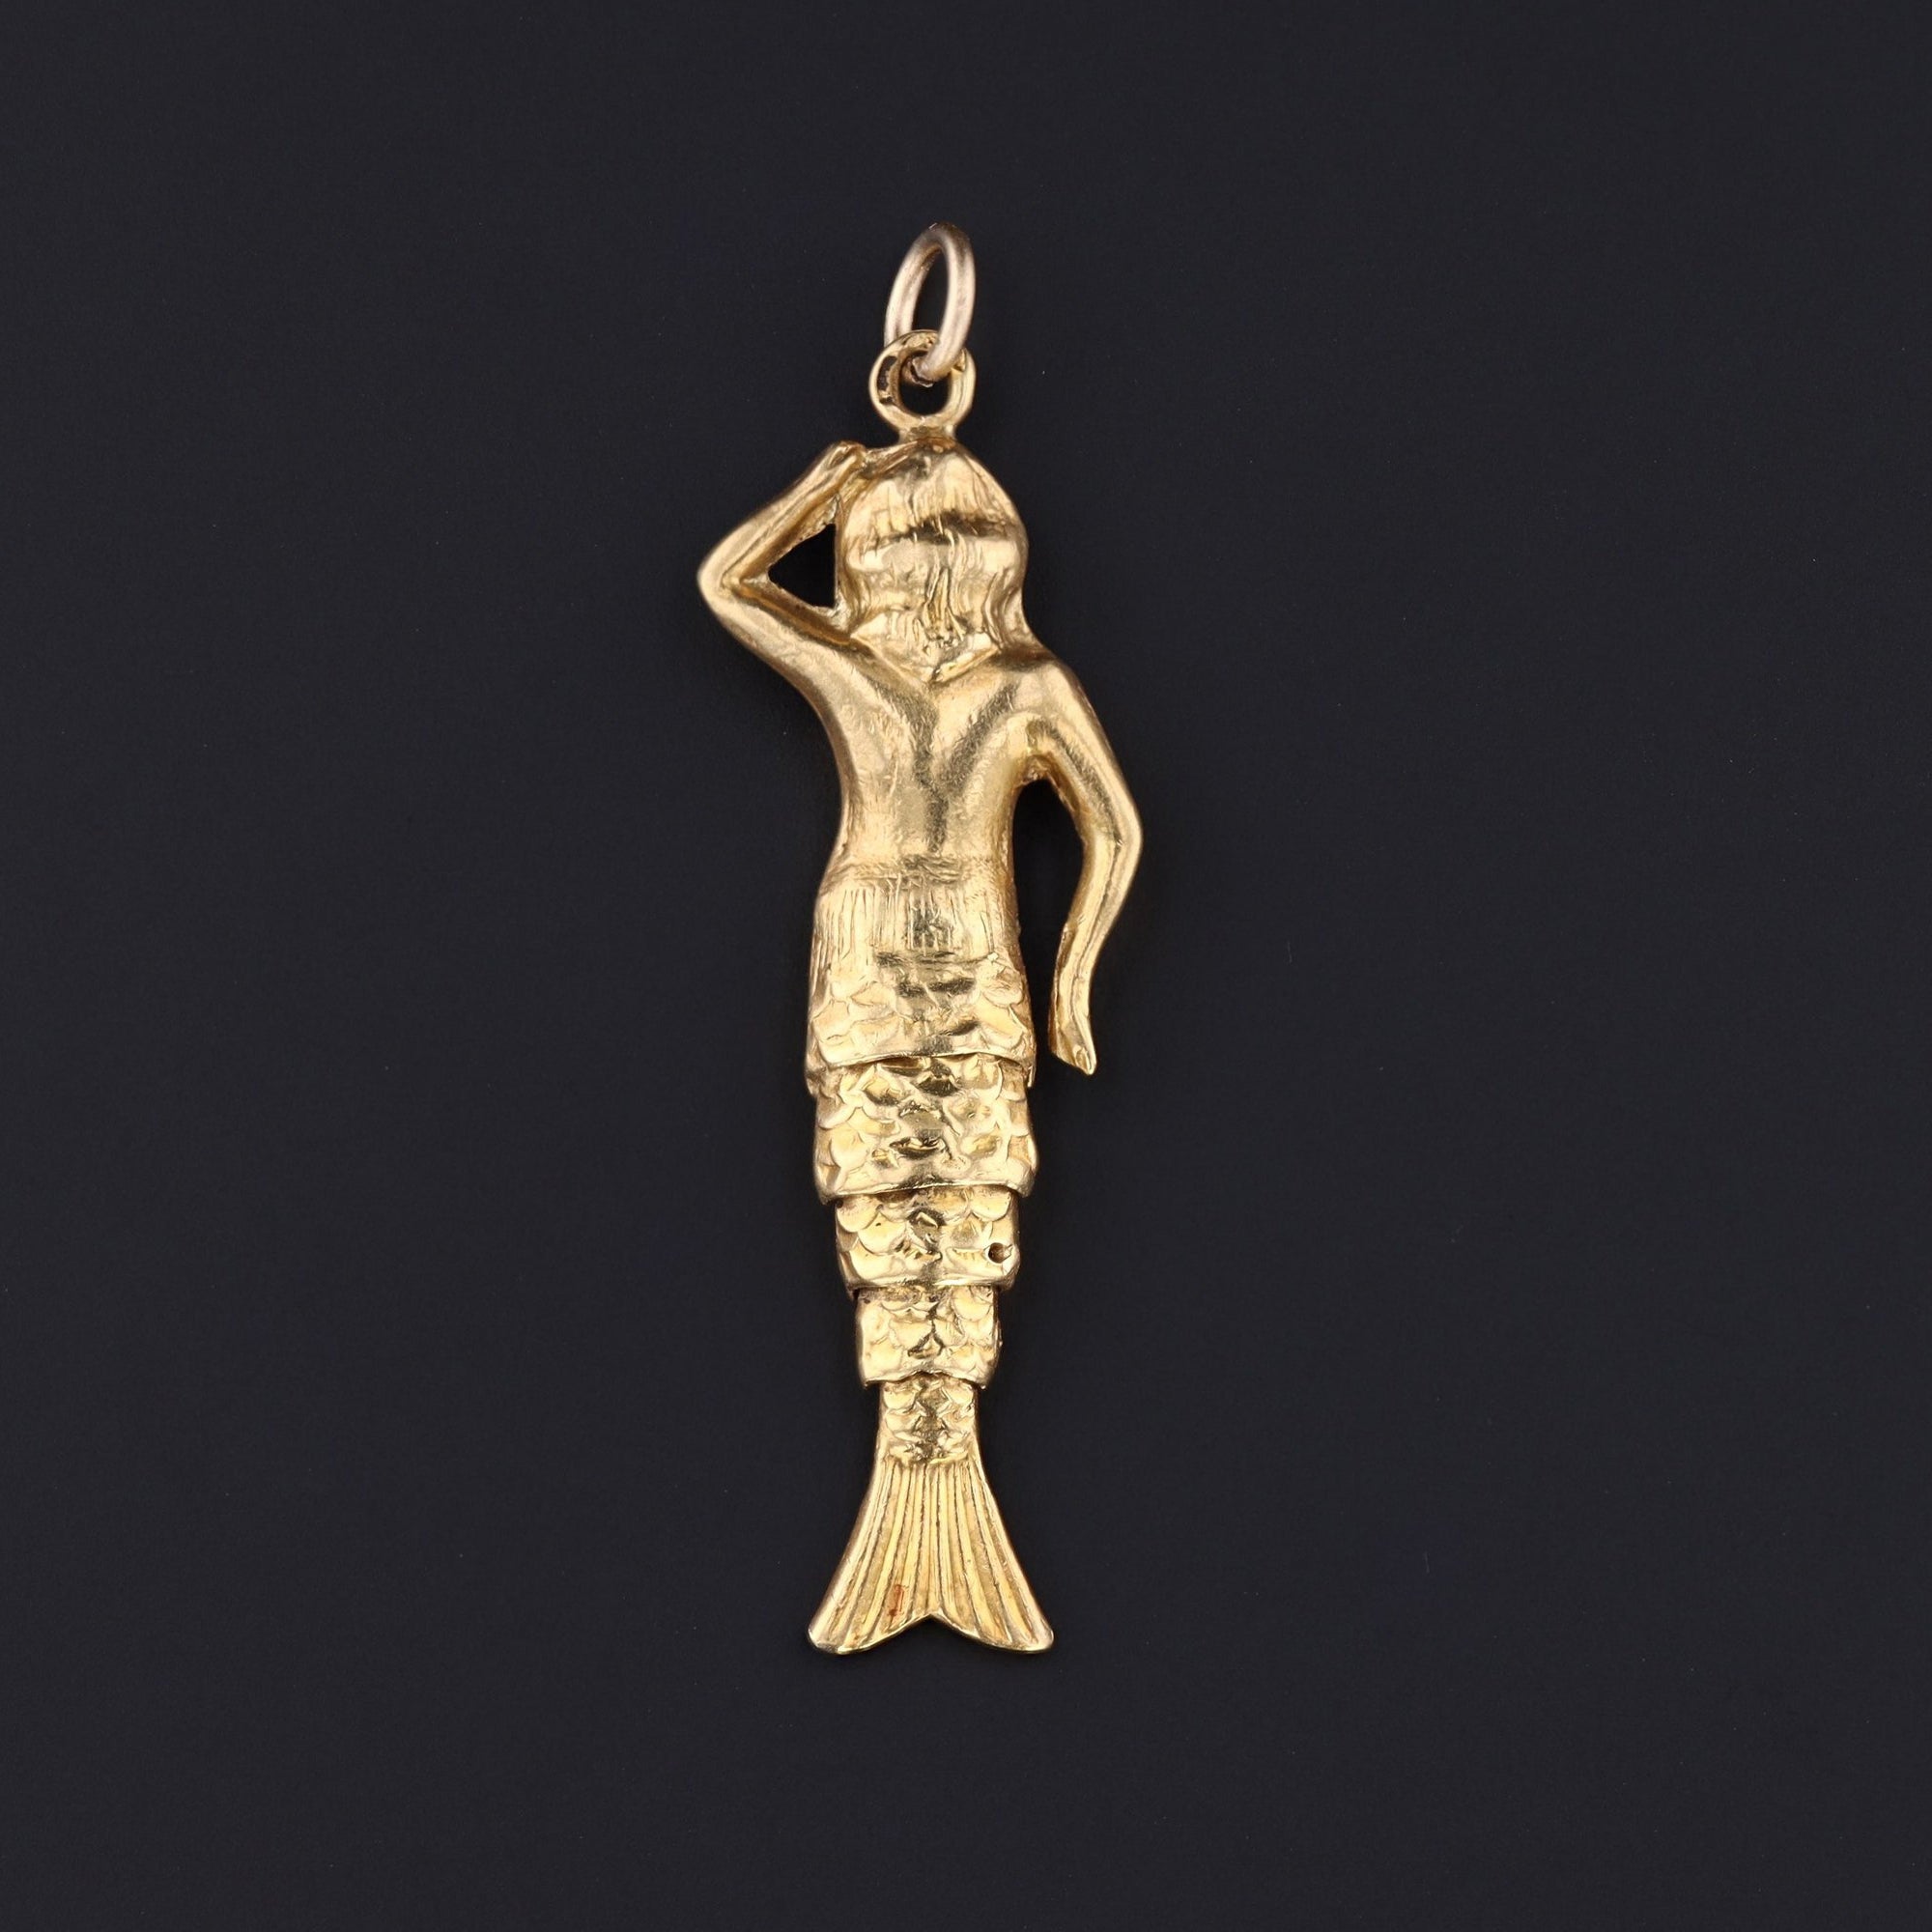 Mermaid Pendant | 18K Gold Mermaid | Vintage Gold Pendant or Charm | Mermaid With Moveable Tail